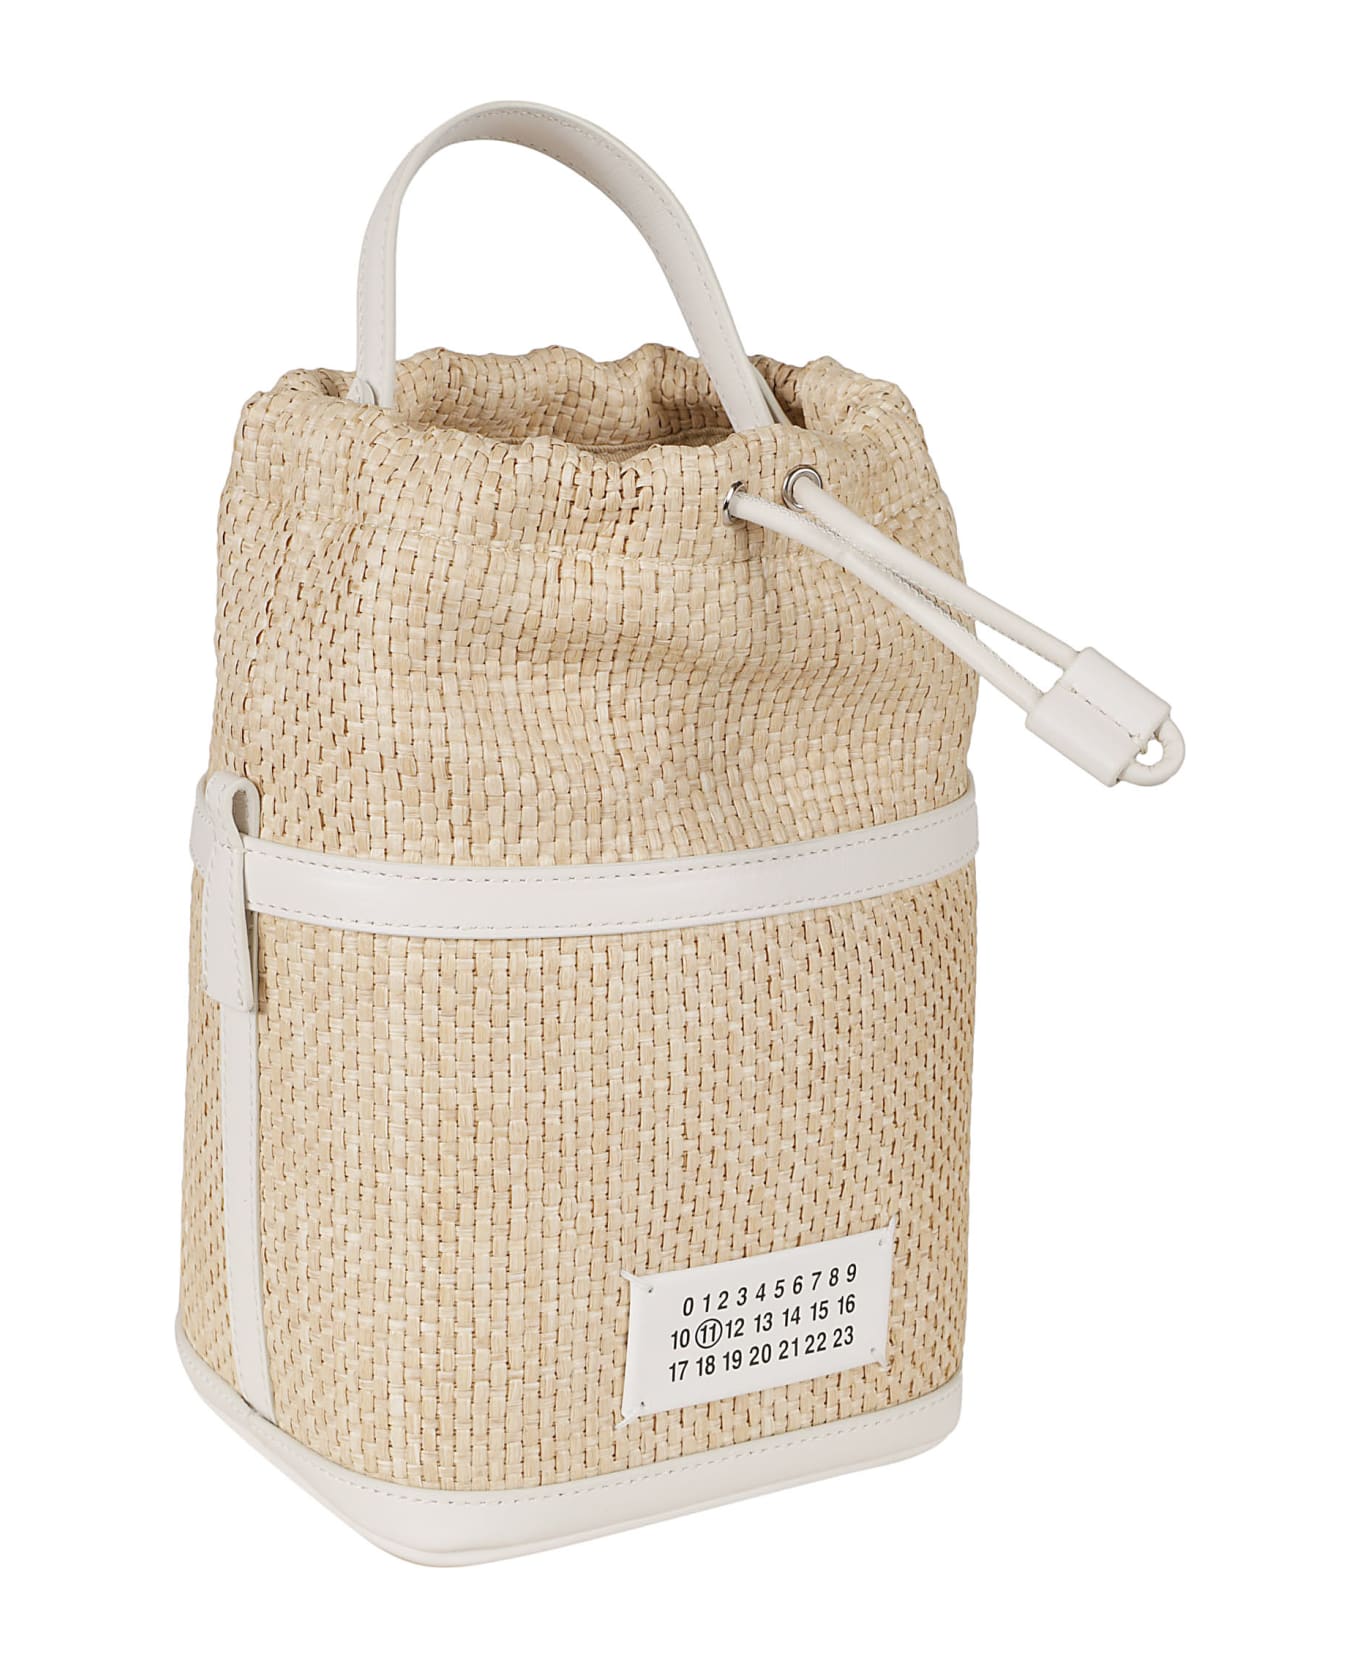 Maison Margiela Logo Patched Woven Bucket Bag - Natural/Dirty White